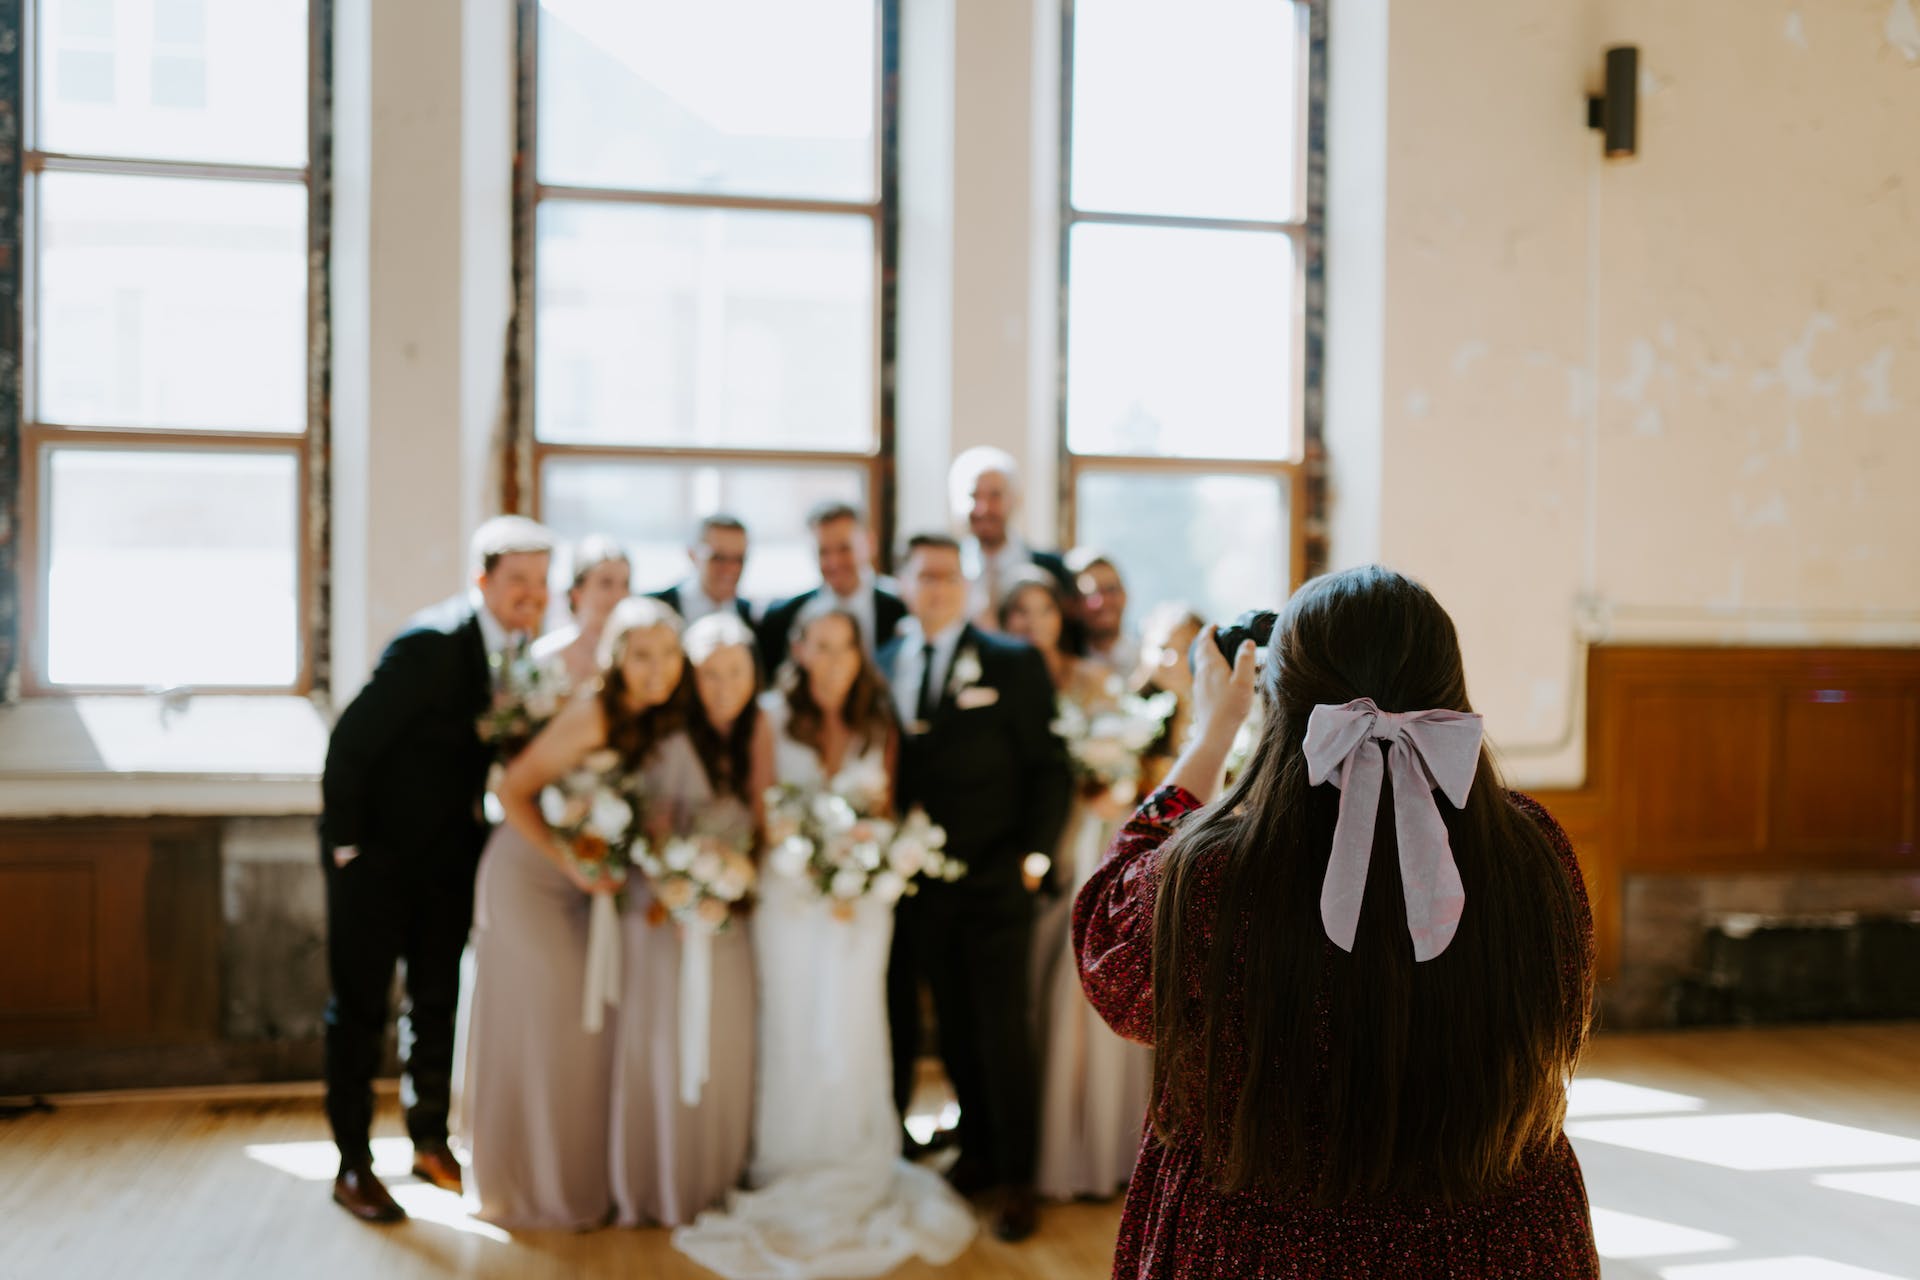 A woman taking a photo at a wedding | Source: Pexels